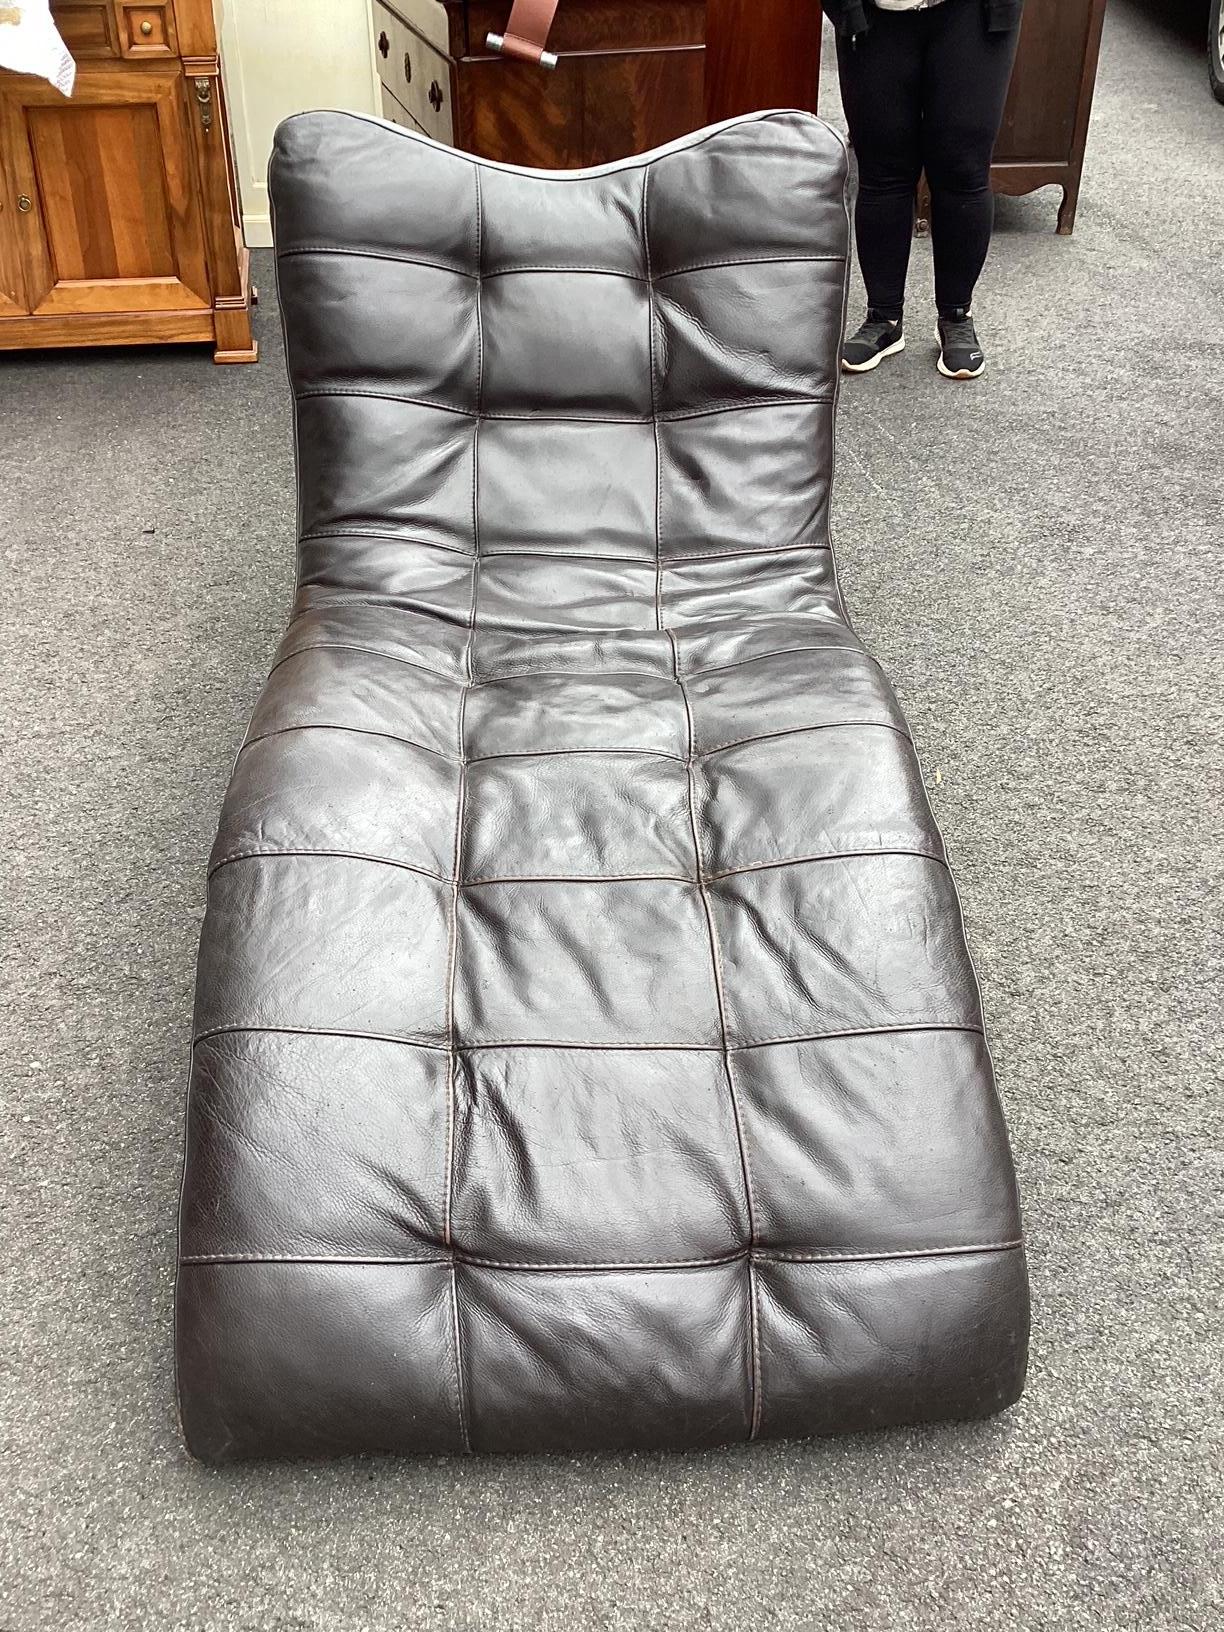 vintage leather chaise lounge